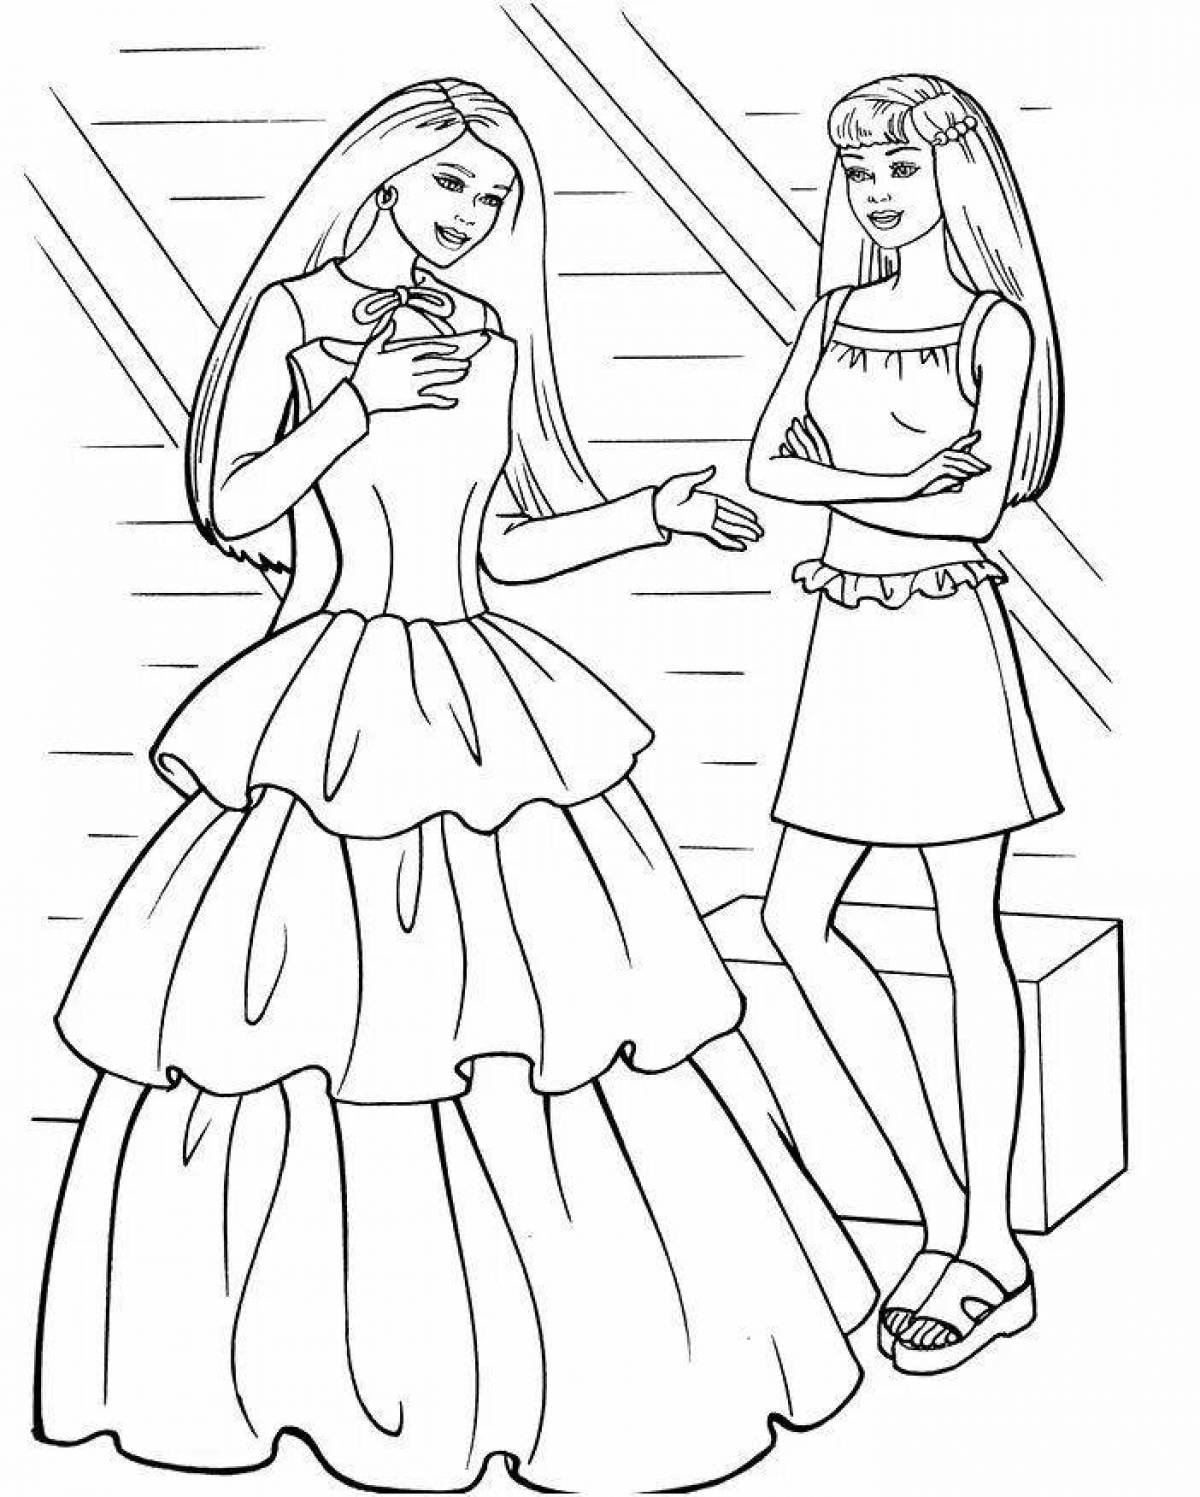 Coloring page violent barbie in the car